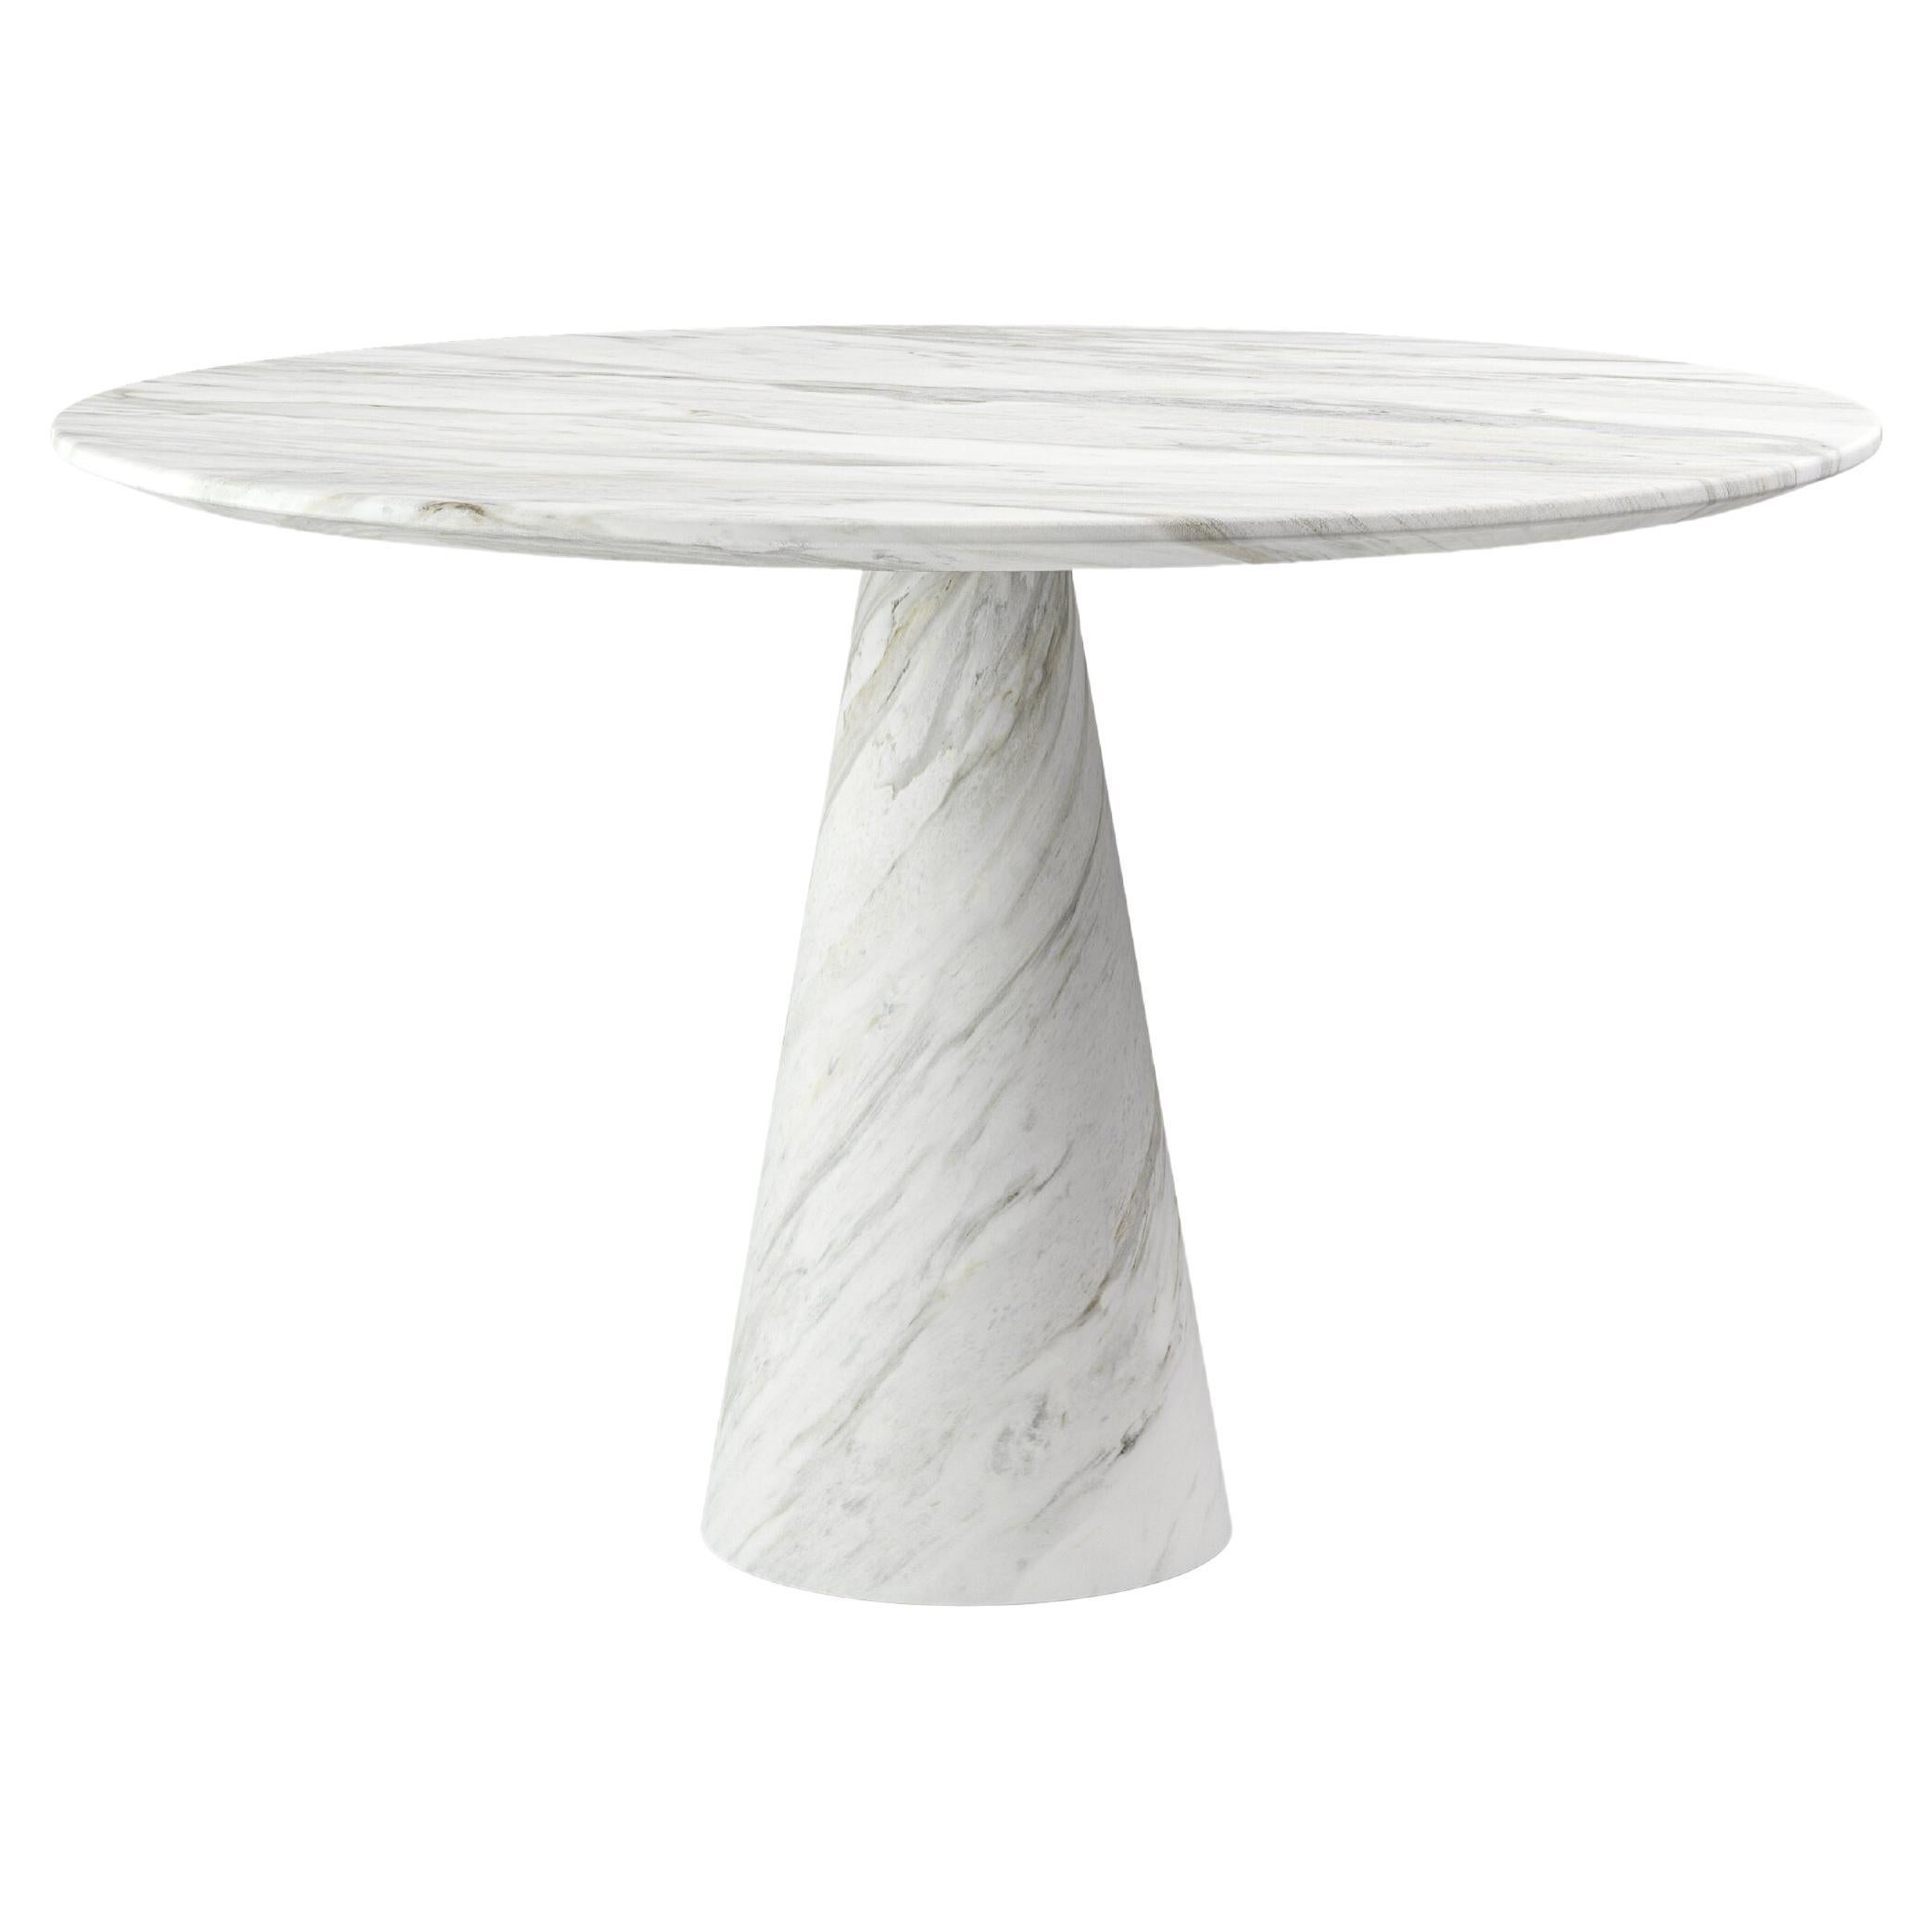 FORM(LA) Cono Round Dining Table 48”L x 48”W x 30”H Volakas White Marble For Sale